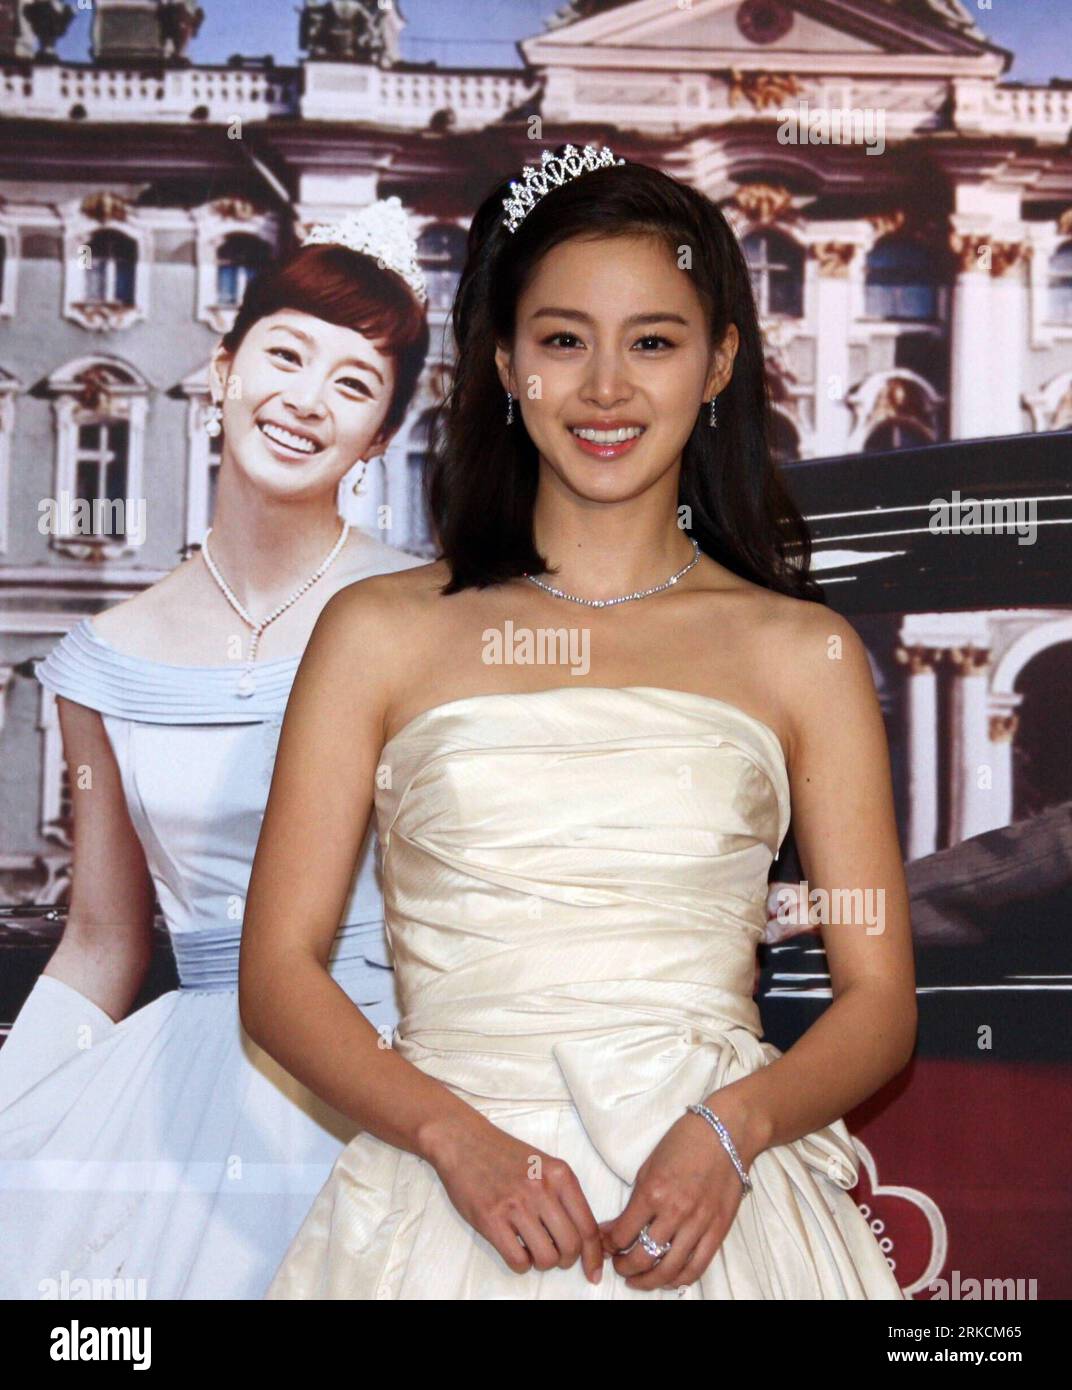 Bildnummer: 54780824  Datum: 03.01.2011  Copyright: imago/Xinhua (110103) -- SEOUL, Jan. 3, 2011 (Xinhua) -- South Korean actress Kim Tae Hee takes part in a preview event of the new TV series My Princess in Seoul, South Korea, Jan. 3, 2011. My Princess will be on show since Jan. 5, 2011. (Xinhua/He Lulu) (yc) SOUTH KOREA-SEOUL-TV SERIES PUBLICATIONxNOTxINxCHN Entertainment People Film TV kbdig xsp 2011 hoch     Bildnummer 54780824 Date 03 01 2011 Copyright Imago XINHUA  Seoul Jan 3 2011 XINHUA South Korean actress Kim Tae Hee Takes Part in a Preview Event of The New TV Series My Princess in S Stock Photo